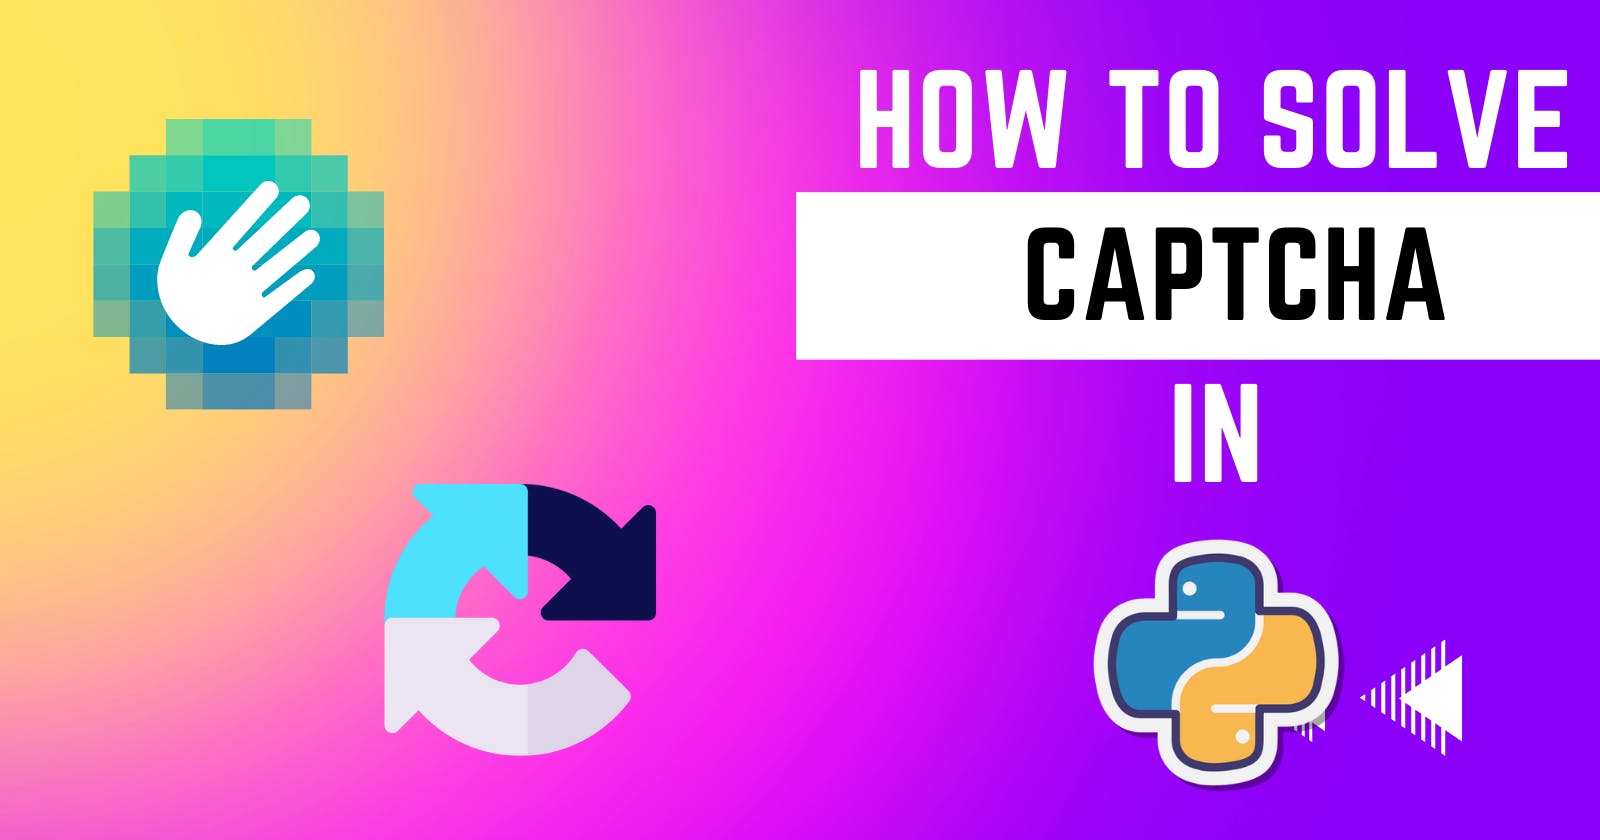 How To Solve CAPTCHA In A Few Steps In Python Using 2captcha